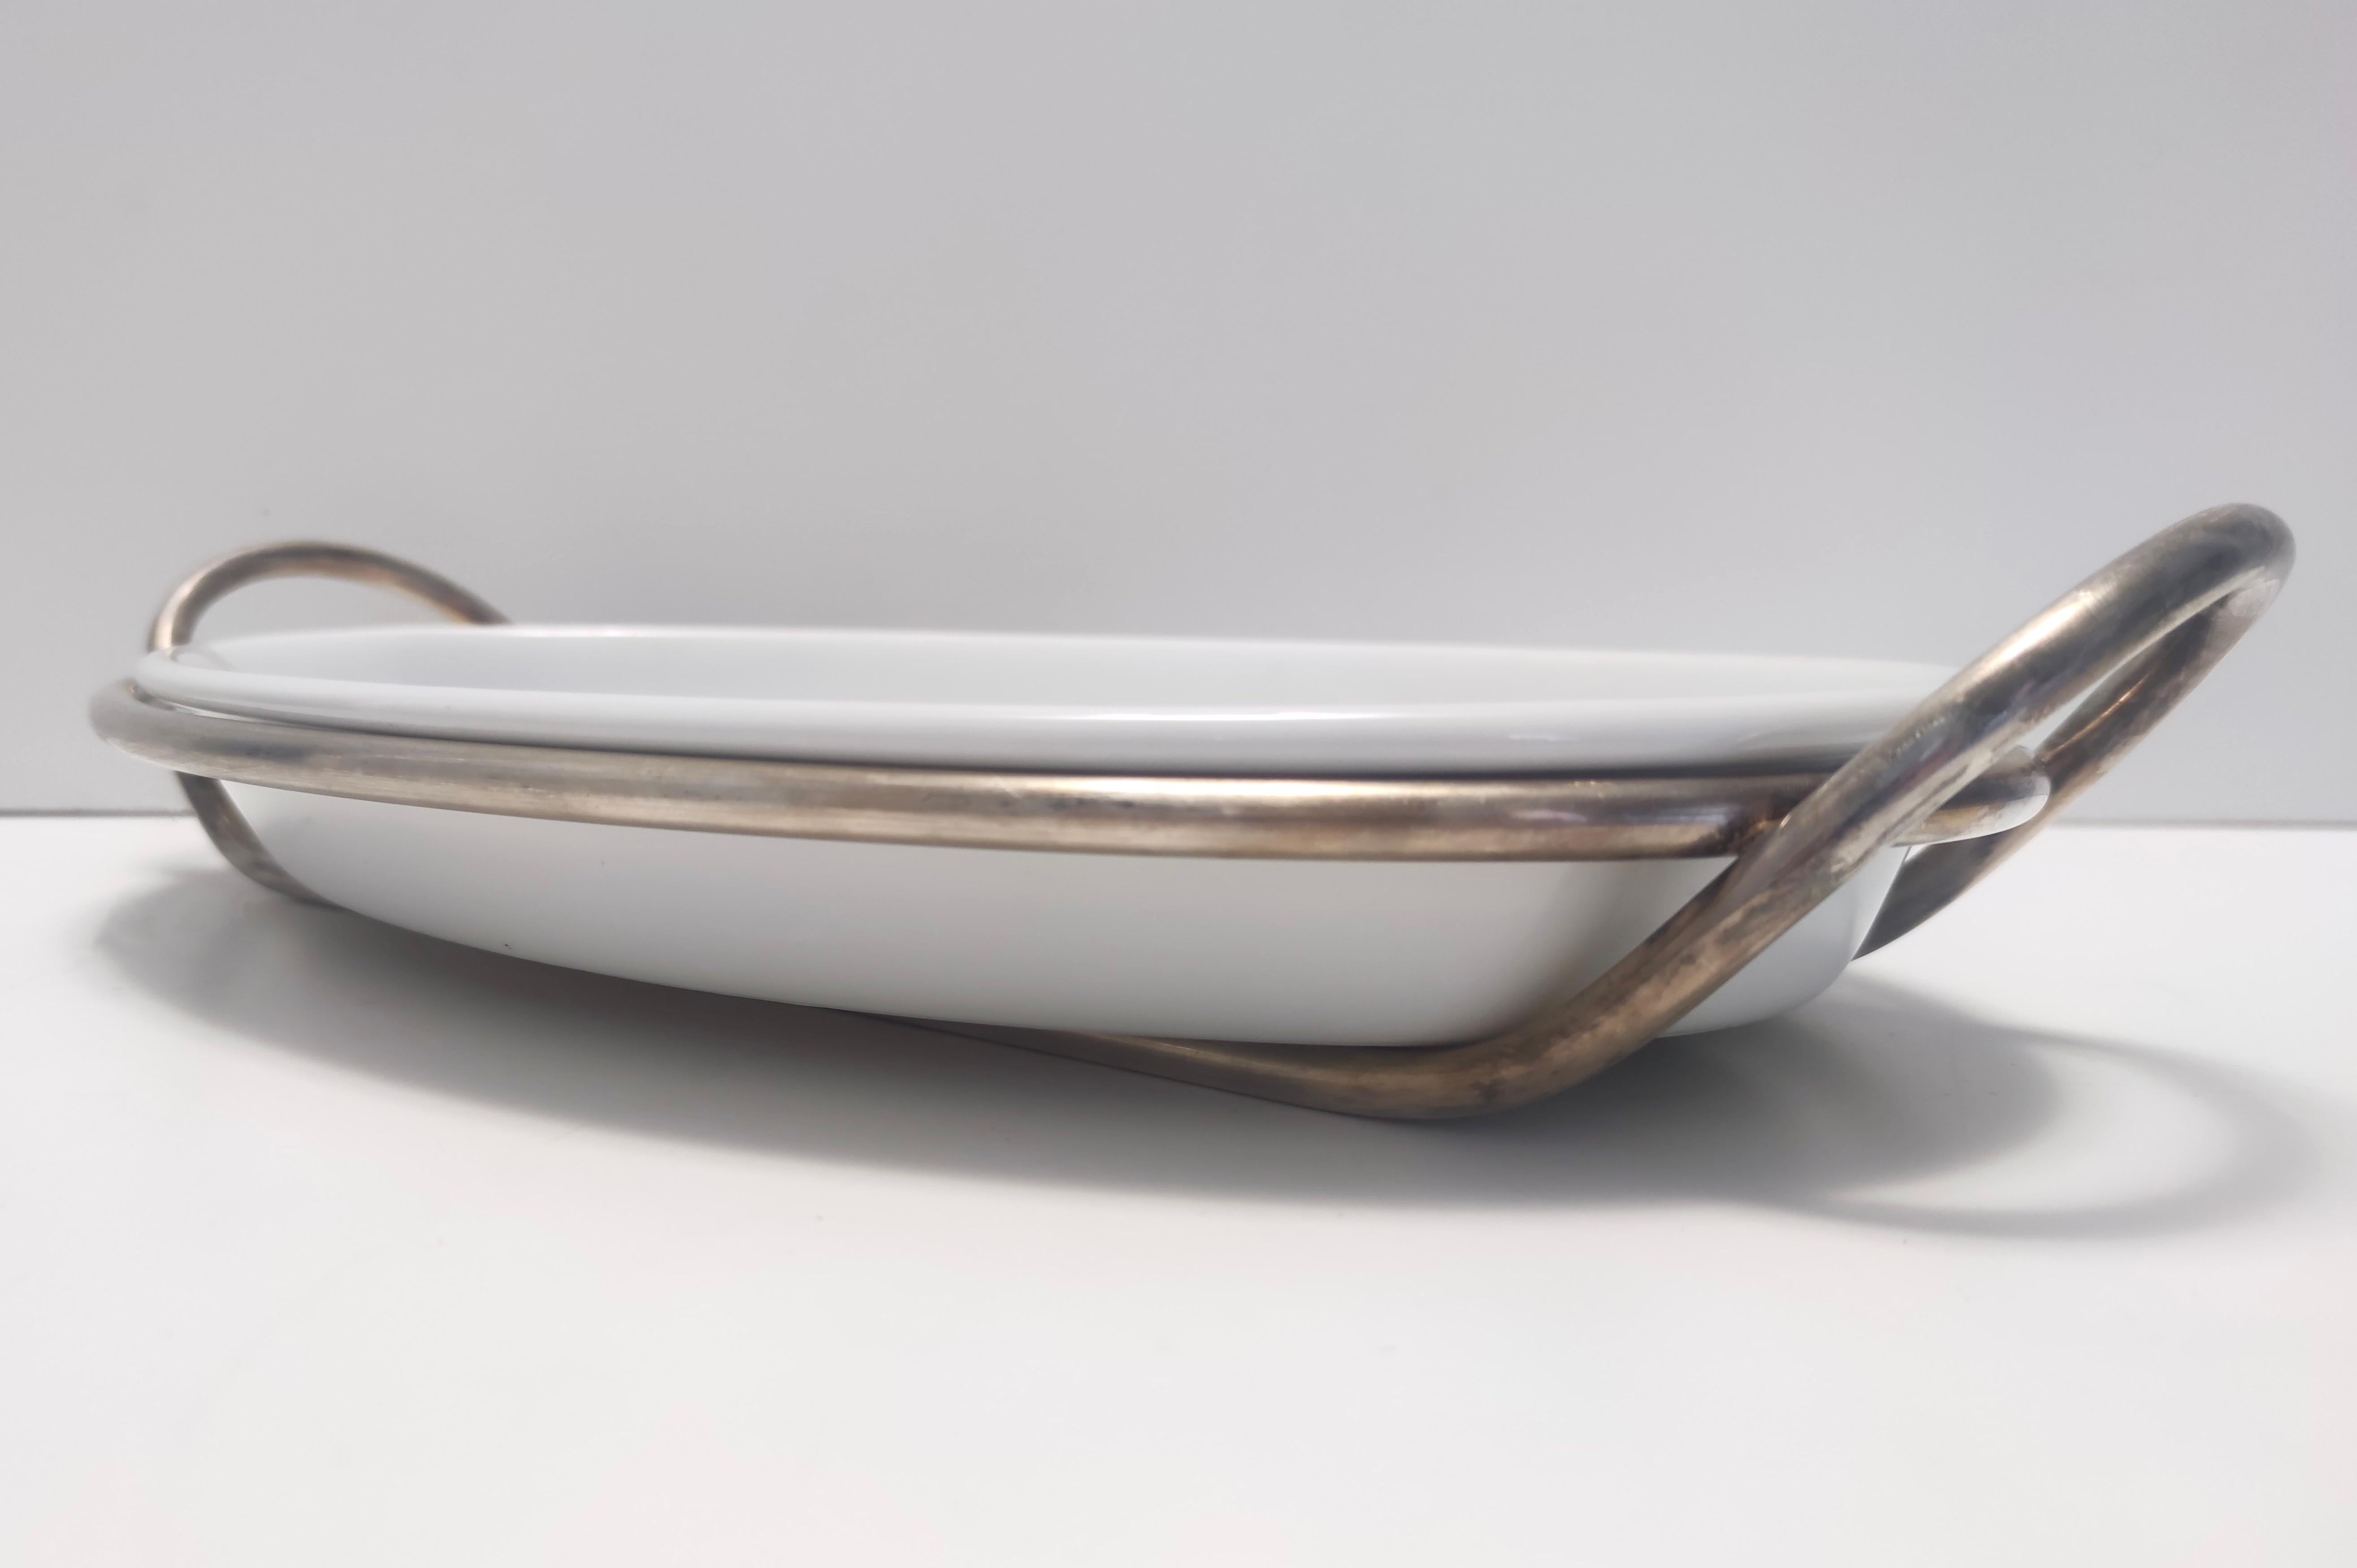 Postmodern Lino Sabattini Silver-Plated and Ceramic Serving Plate, Italy In Good Condition For Sale In Bresso, Lombardy